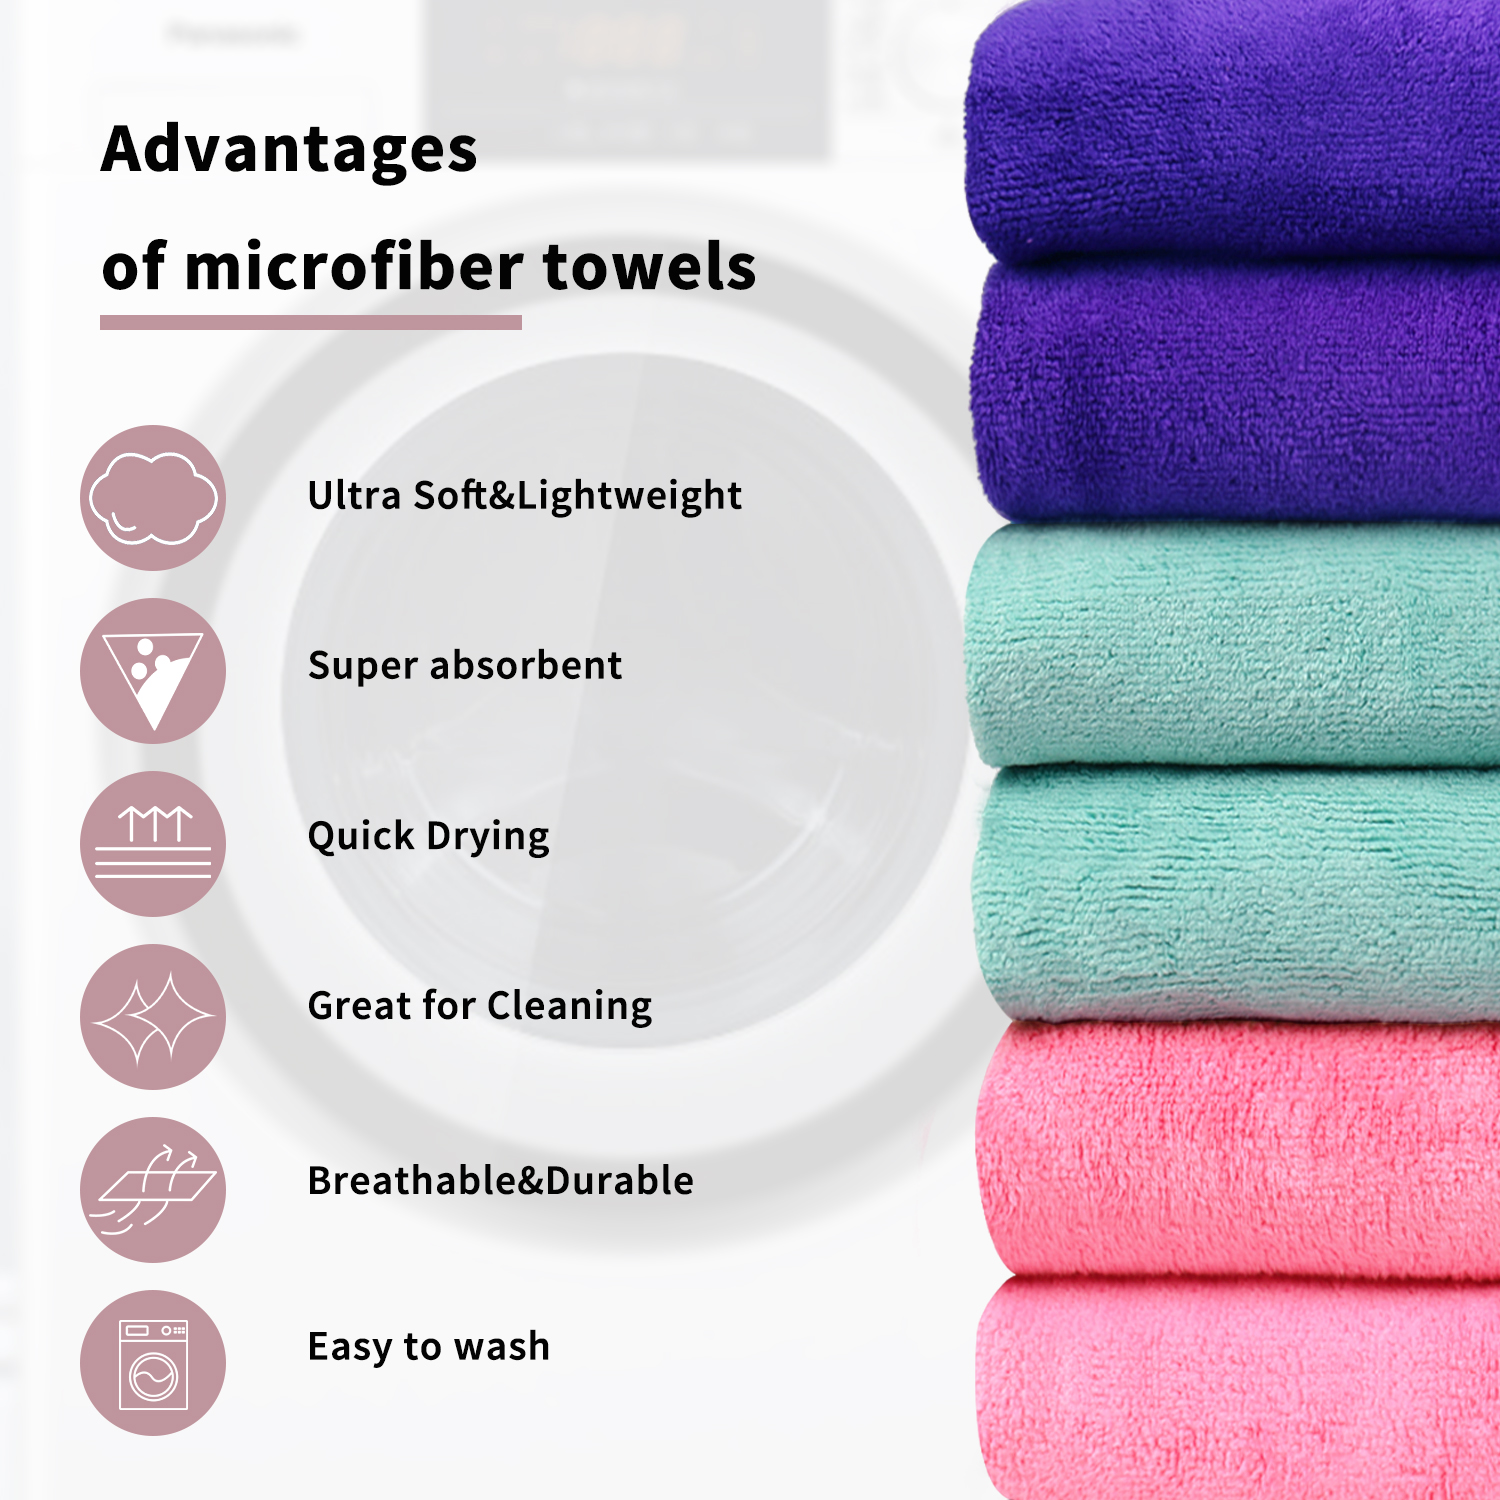 JML Bath Towel, Microfiber 6 Pack Towel Sets (27 x 55") - Extra Absorbent, Fast Drying Multipurpose Use as Bath Fitness Towel, Sports Towels, Yoga Towel, Green Blue Pink - image 4 of 5